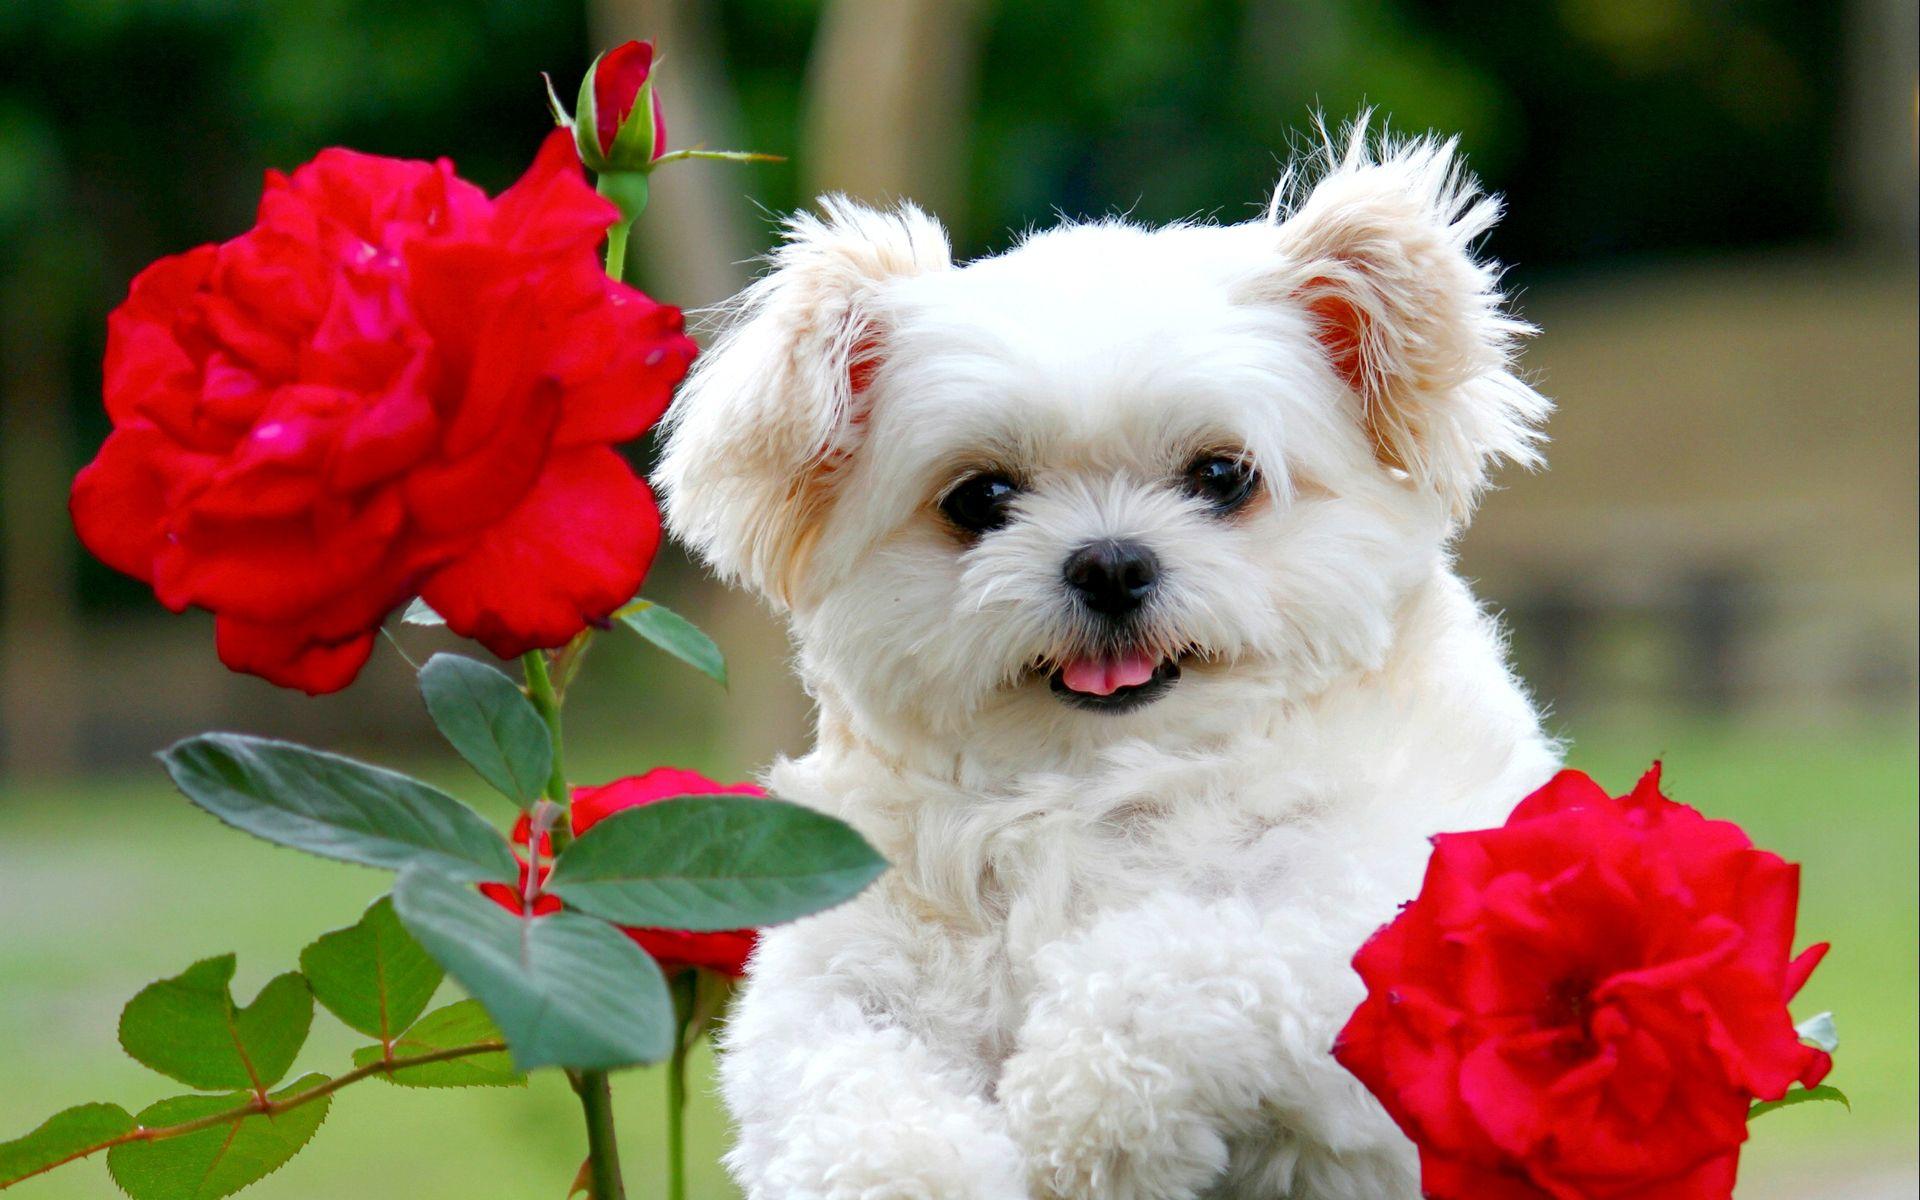 Cute Puppies Image Free Download